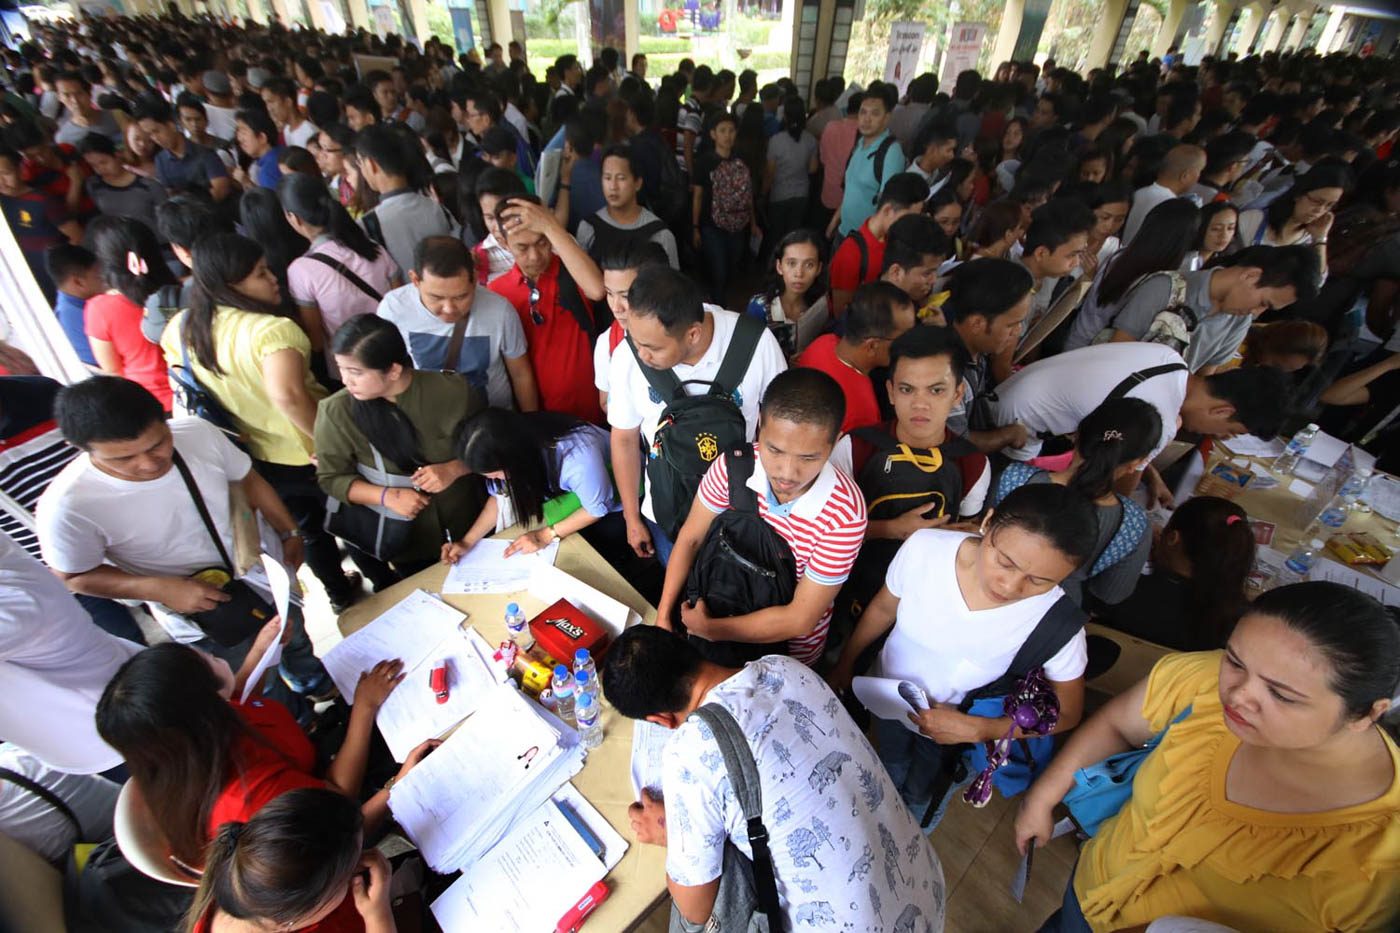 A total of 34,359 applicants registered in 2018 DOLE Job Fair at Quezon City Hall. Photo by Darren langit/Rappler 